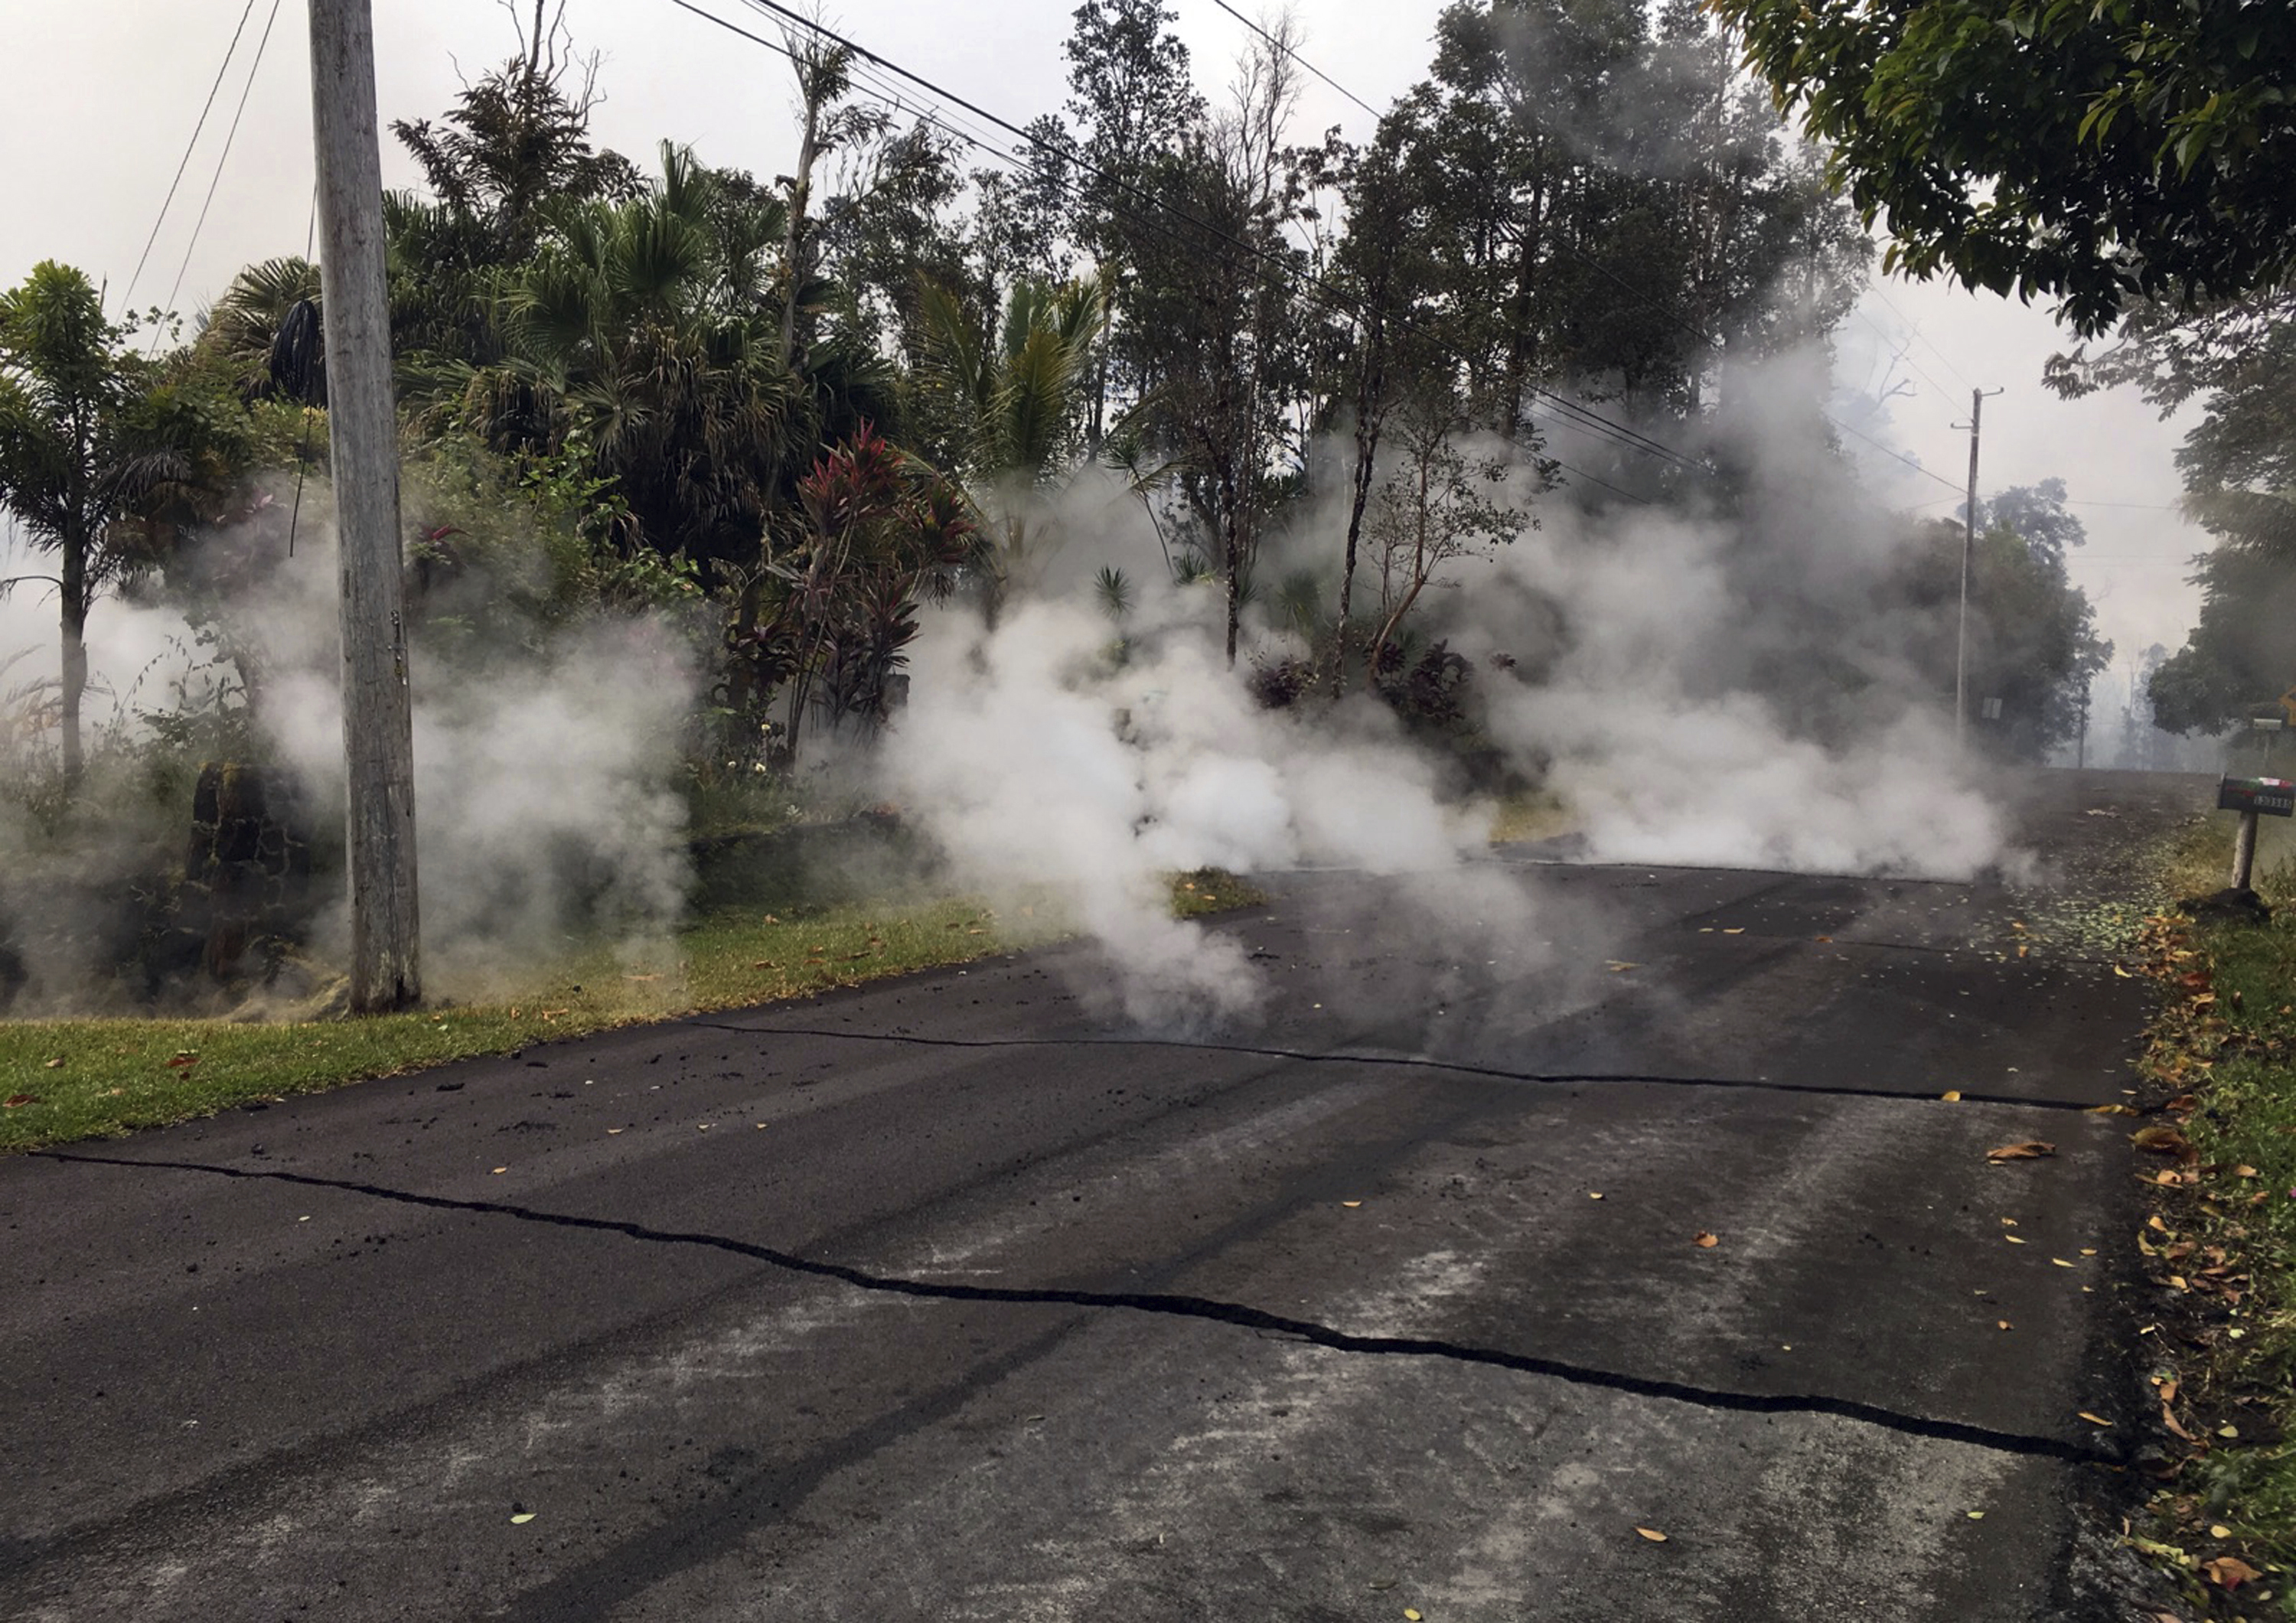 This Monday, May 7, 2018 photo from the U.S. Geological Survey shows gas and steam rising from multiple fissures on Moku Street in the Leilani Estates Subdivision near Pahoa on the island of Hawaii. Kilauea volcano has destroyed more than two dozen homes since it began spewing lava hundreds of feet into the air last week, and residents who evacuated don't know how long they might be displaced. The decimated homes were in the Leilani Estates subdivision, where molten rock, toxic gas and steam have been bursting through openings in the ground created by the volcano. (U.S. Geological Survey via AP)